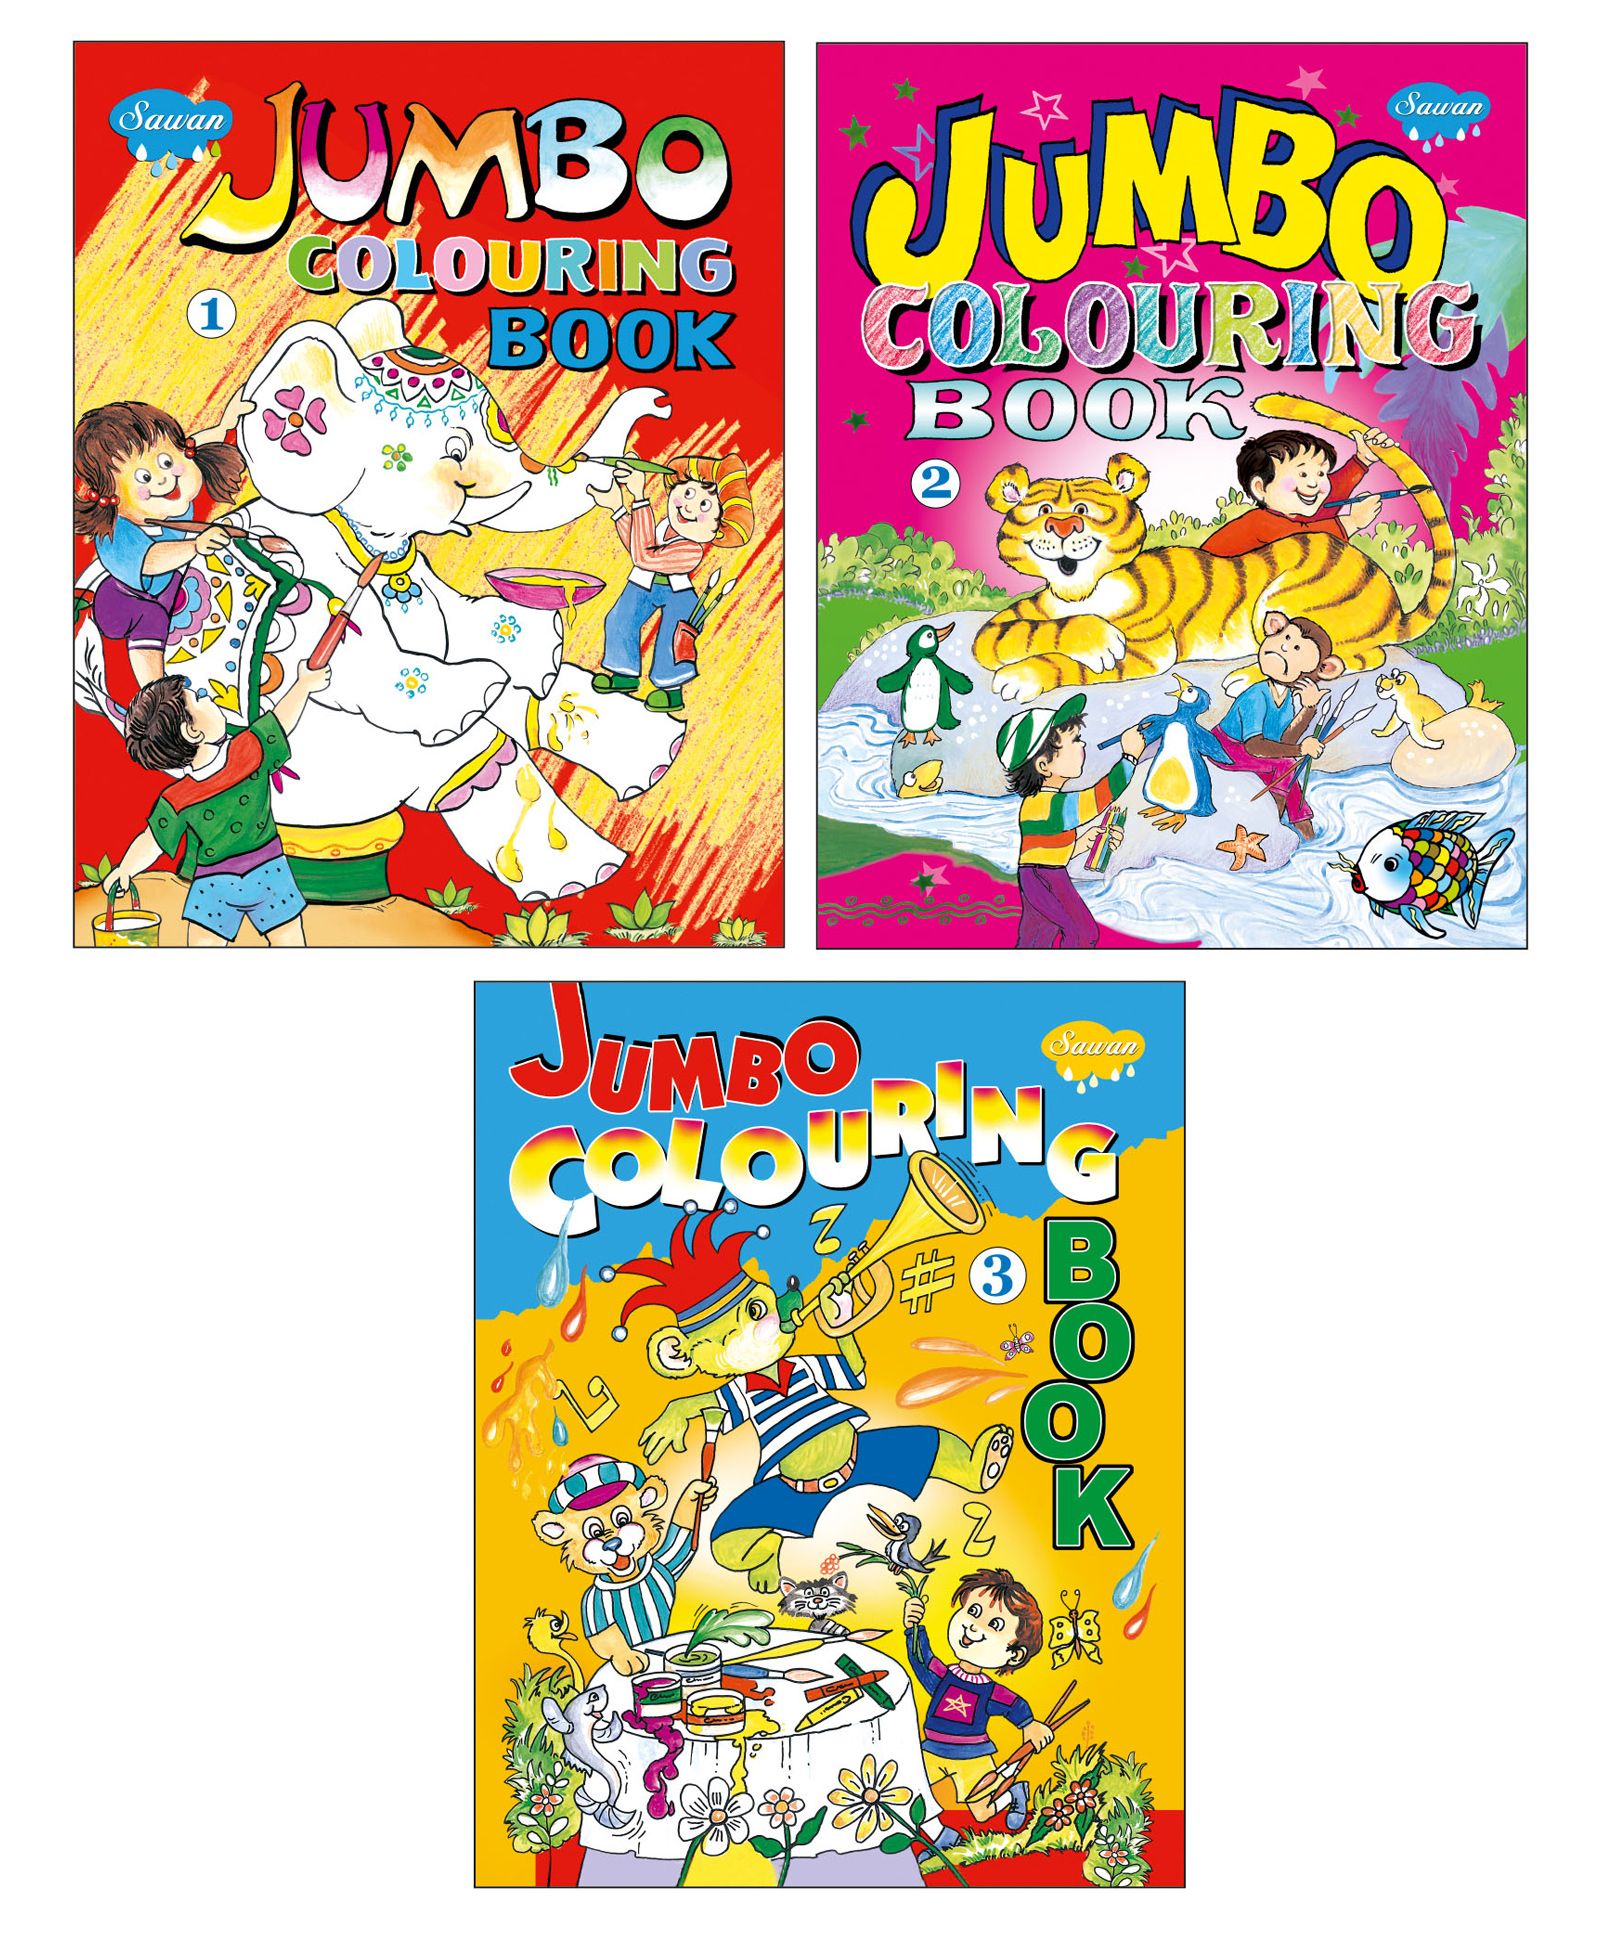 Jumbo Coloring Books Near Me - Butterfly Coloring Pages Jumbo Coloring